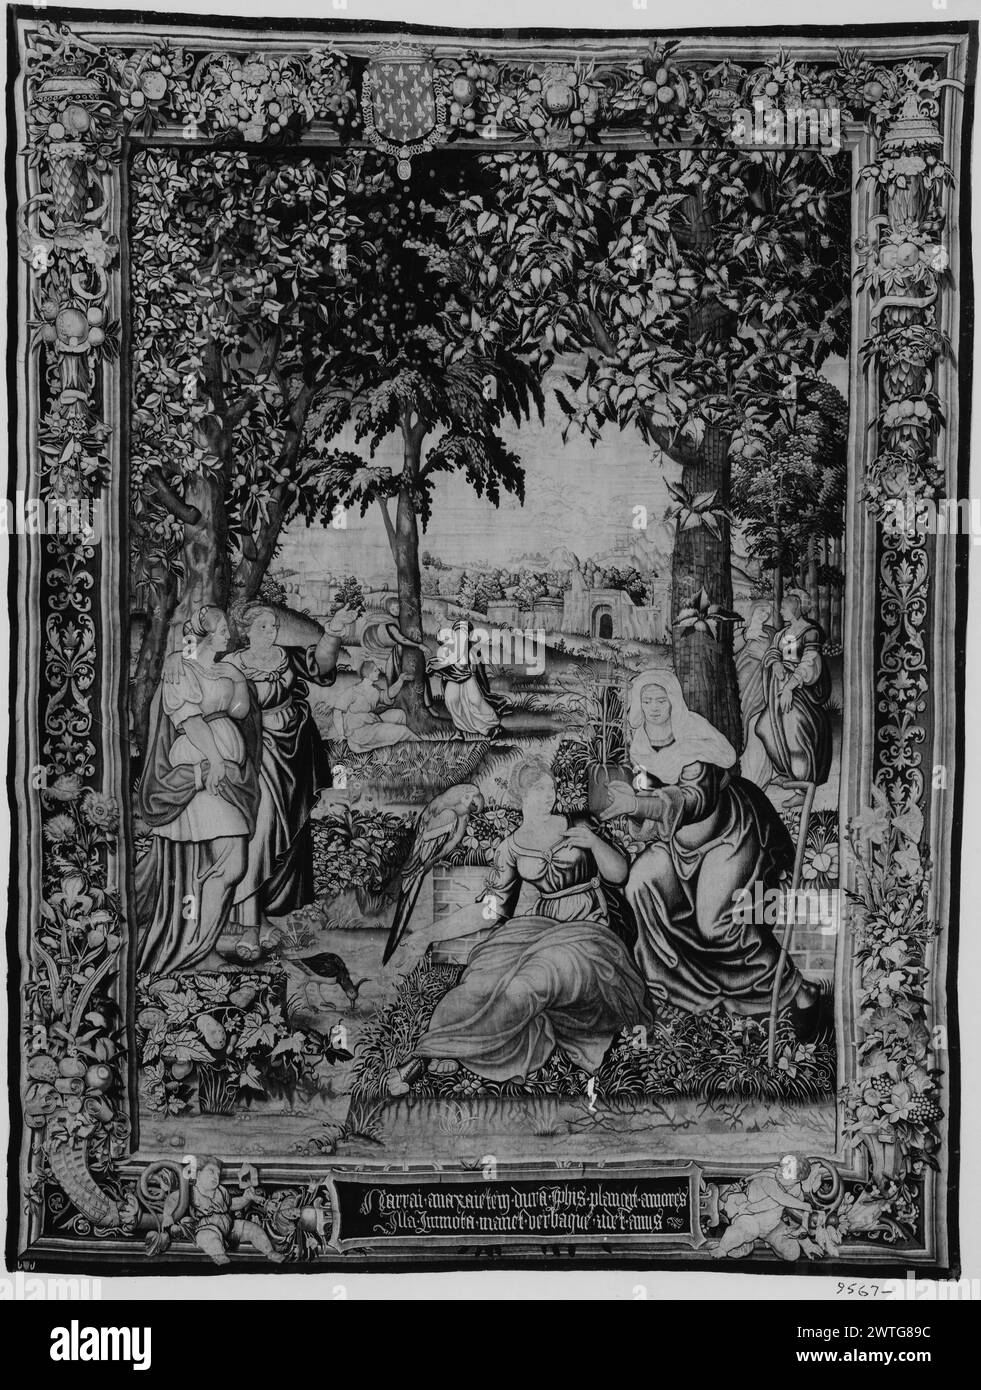 Vertumnus, in guise of old woman, tells Pomona story of Iphis. unknown c. 1535-1550 Tapestry Dimensions: H 11'6' x W 15'4' Tapestry Materials/Techniques: unknown Culture: Flemish Weaving Center: Brussels Ownership History: Sold at Hôtel Drouot (Paris), 4/7/1877, lot 34 (Duc de Berwick et d'Albe sale). Baron D'Erlanger coll. William Randolph Hearst coll., as of 1941. French & Co. Inscriptions: City mark on lower guard, left Inscriptions: Latin inscription in lower border not legible in photograph Related Works: Panels in set: GCPA 0236979-0236982, 0238276; compositionally similar tapestries (si Stock Photo